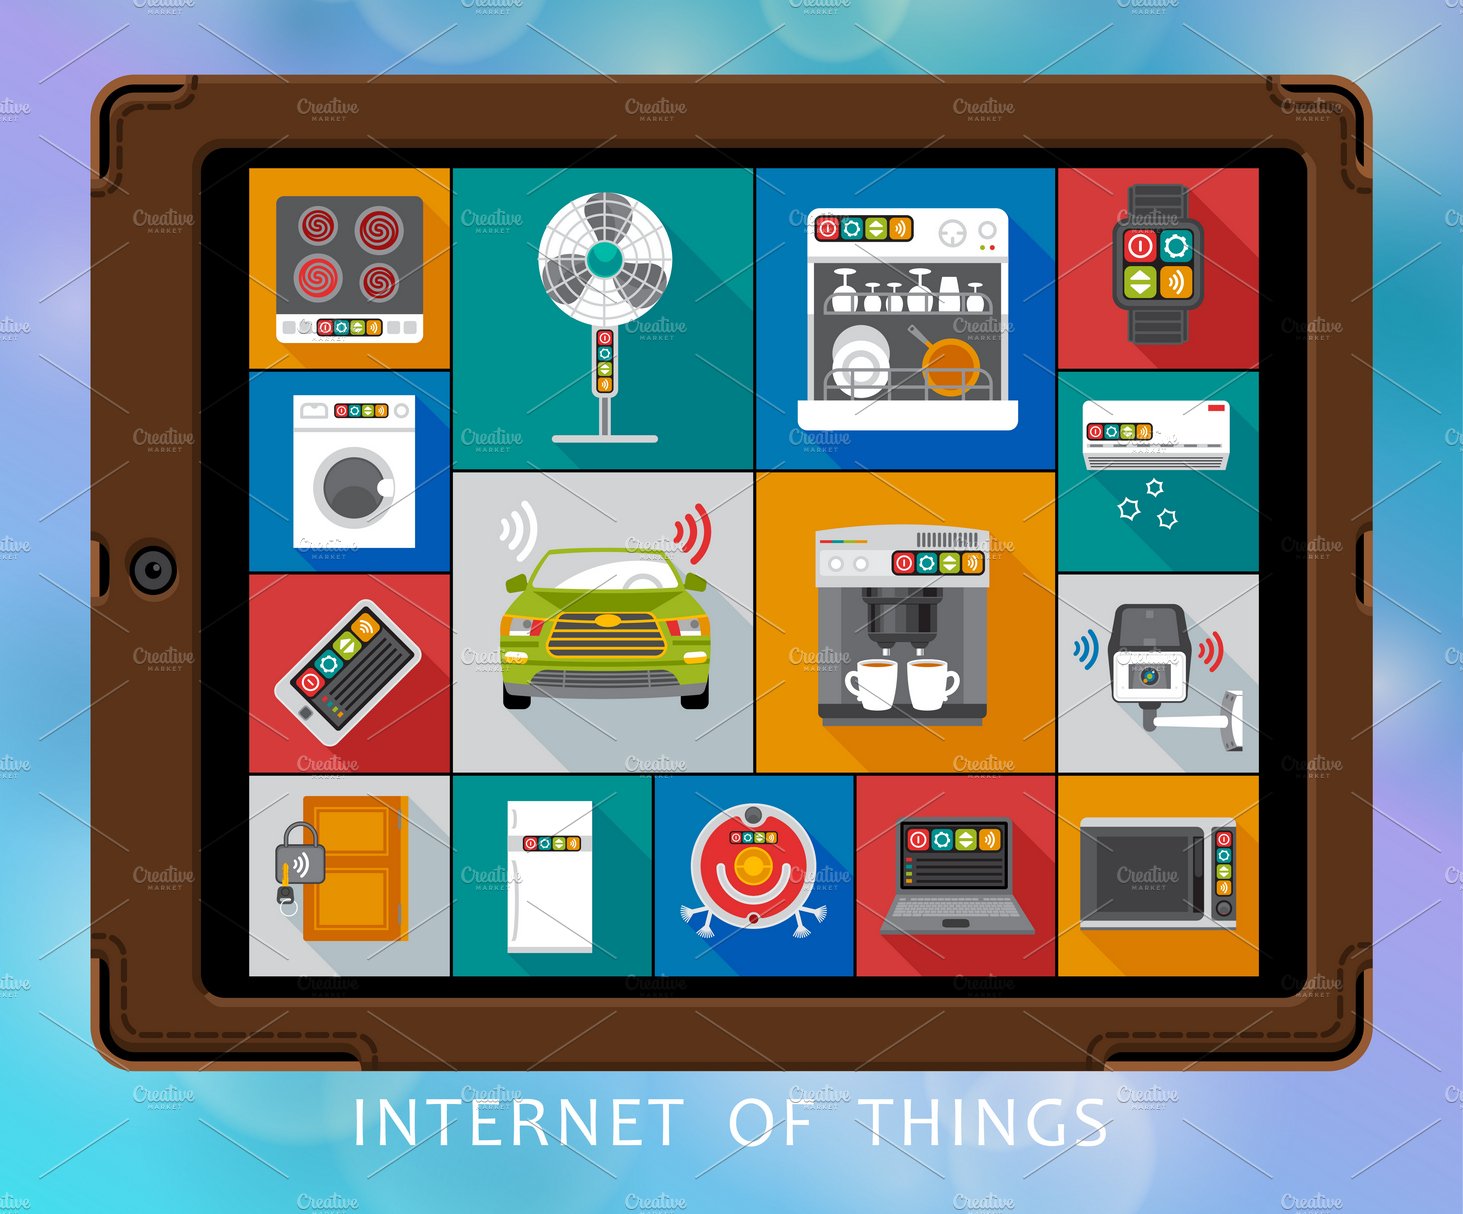 Internet of things flat icons cover image.